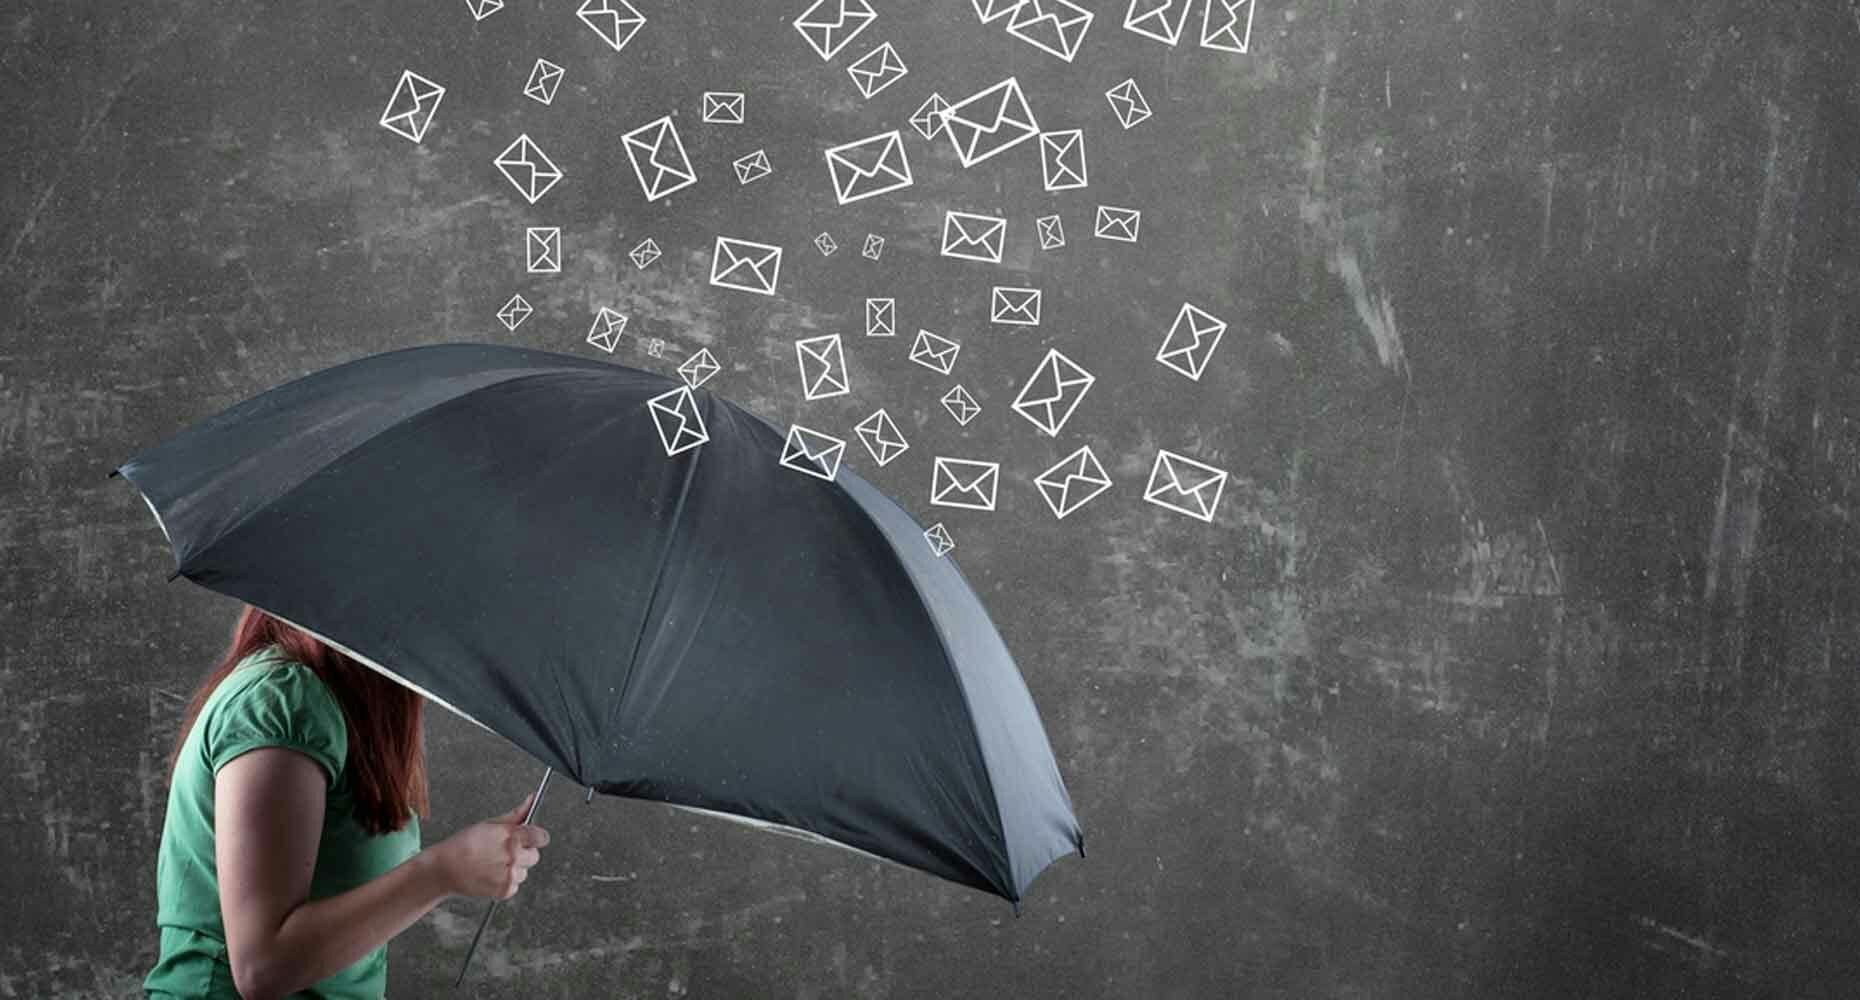 An illustration depicting a storm of emails raining down from the sky, symbolizing an overwhelming influx of digital communication.